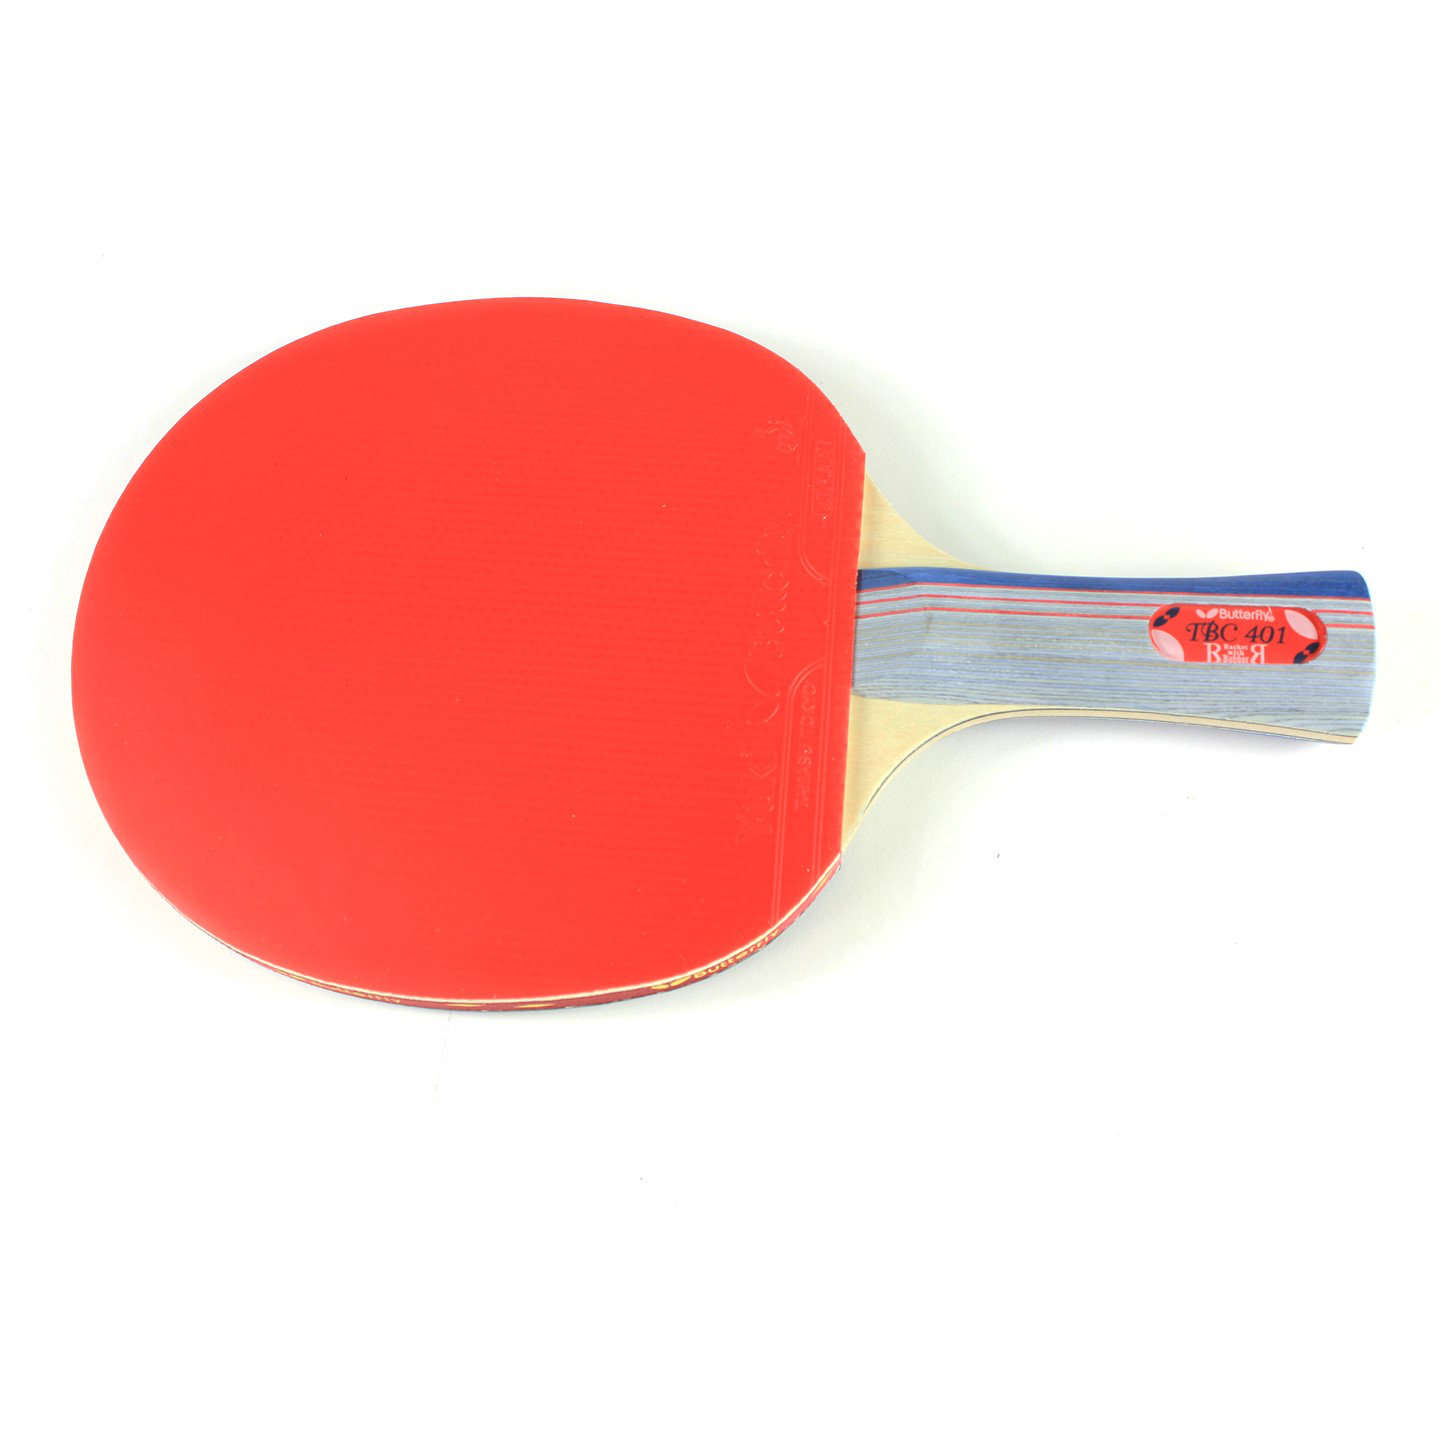 Butterfly 401 Table Tennis Paddle Set